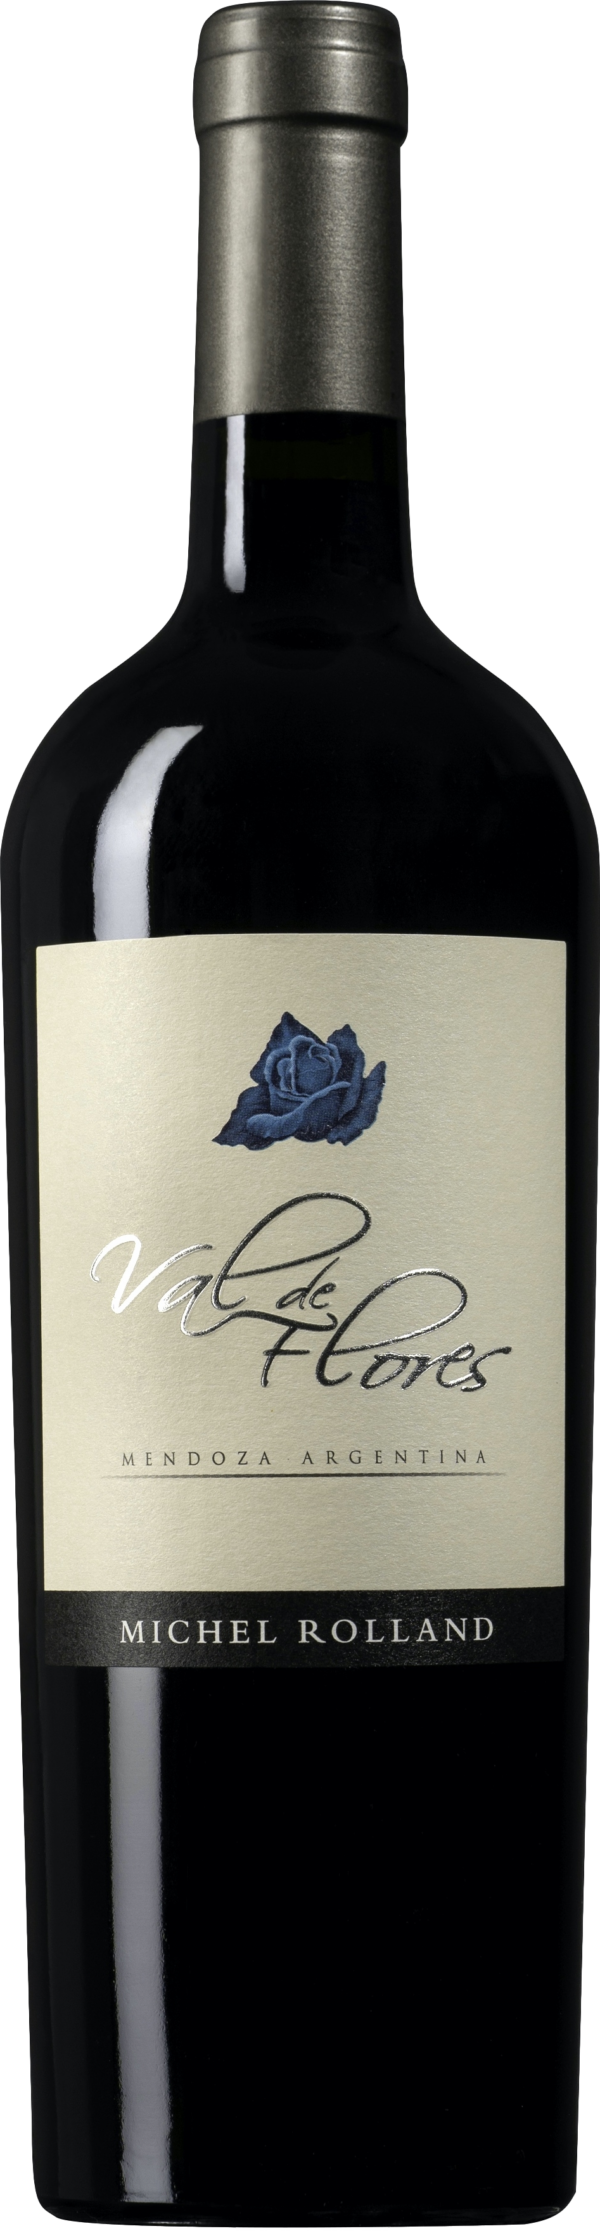 Product image of Michel Rolland Mariflor Val de Flores Malbec 2019 from 8wines